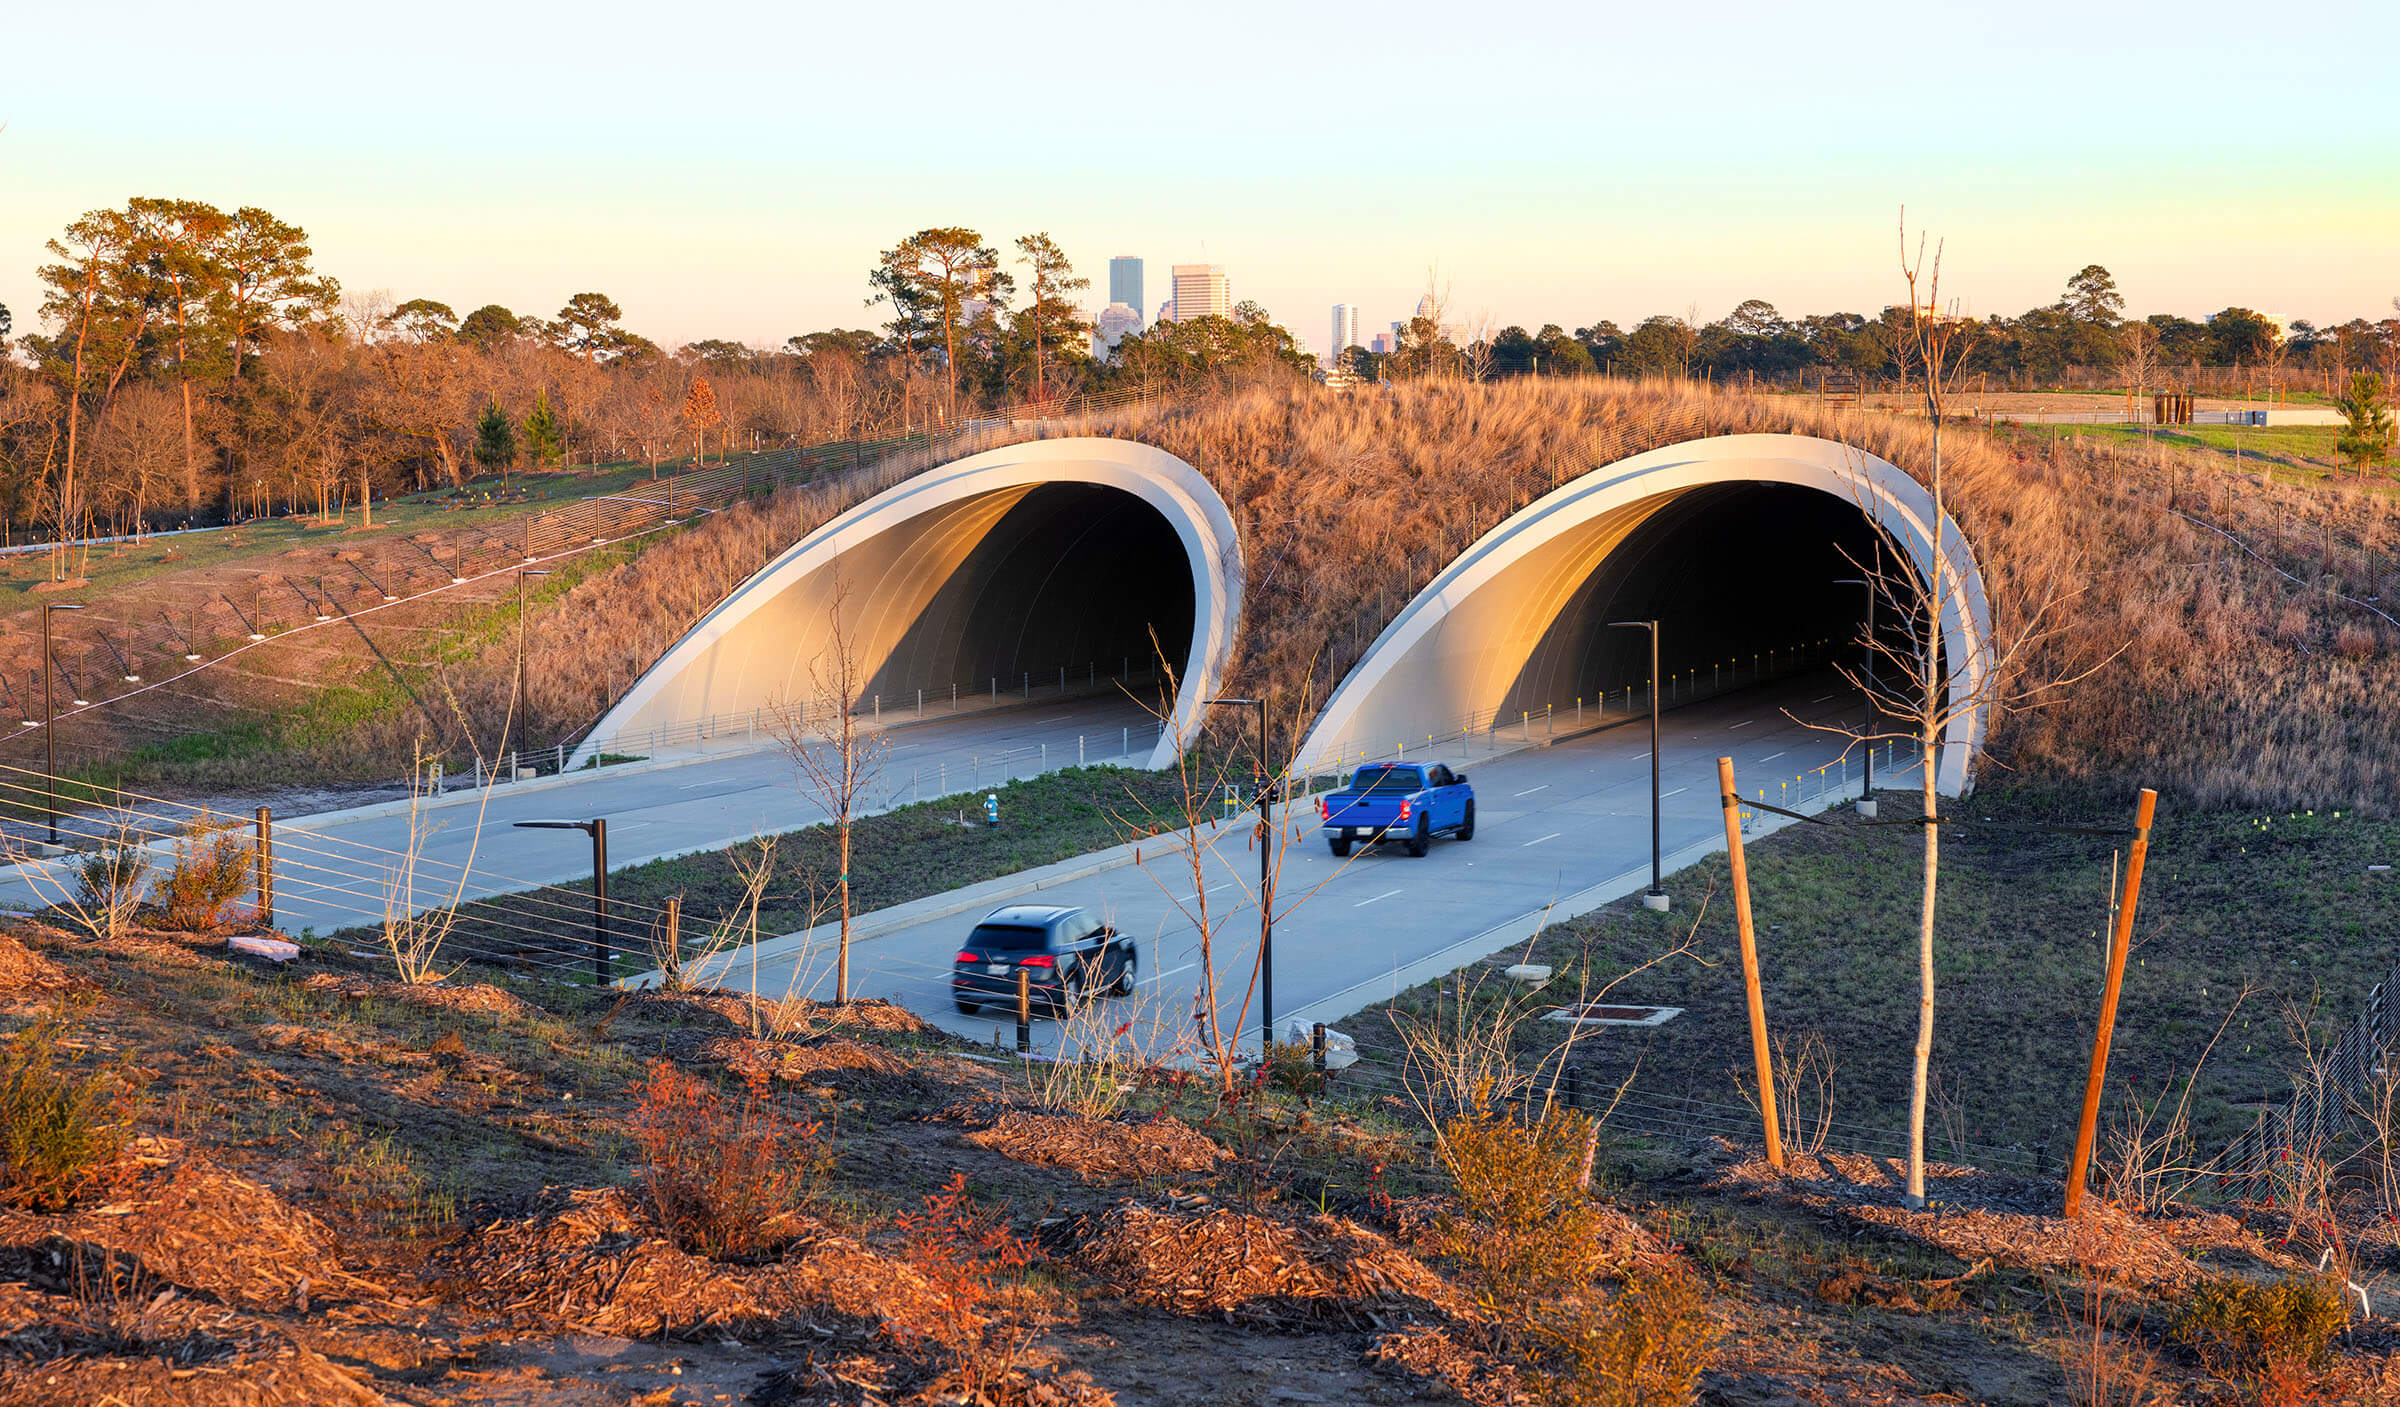 Vehicles drive on a concrete roadway into large concrete tunnels built into a tract of land